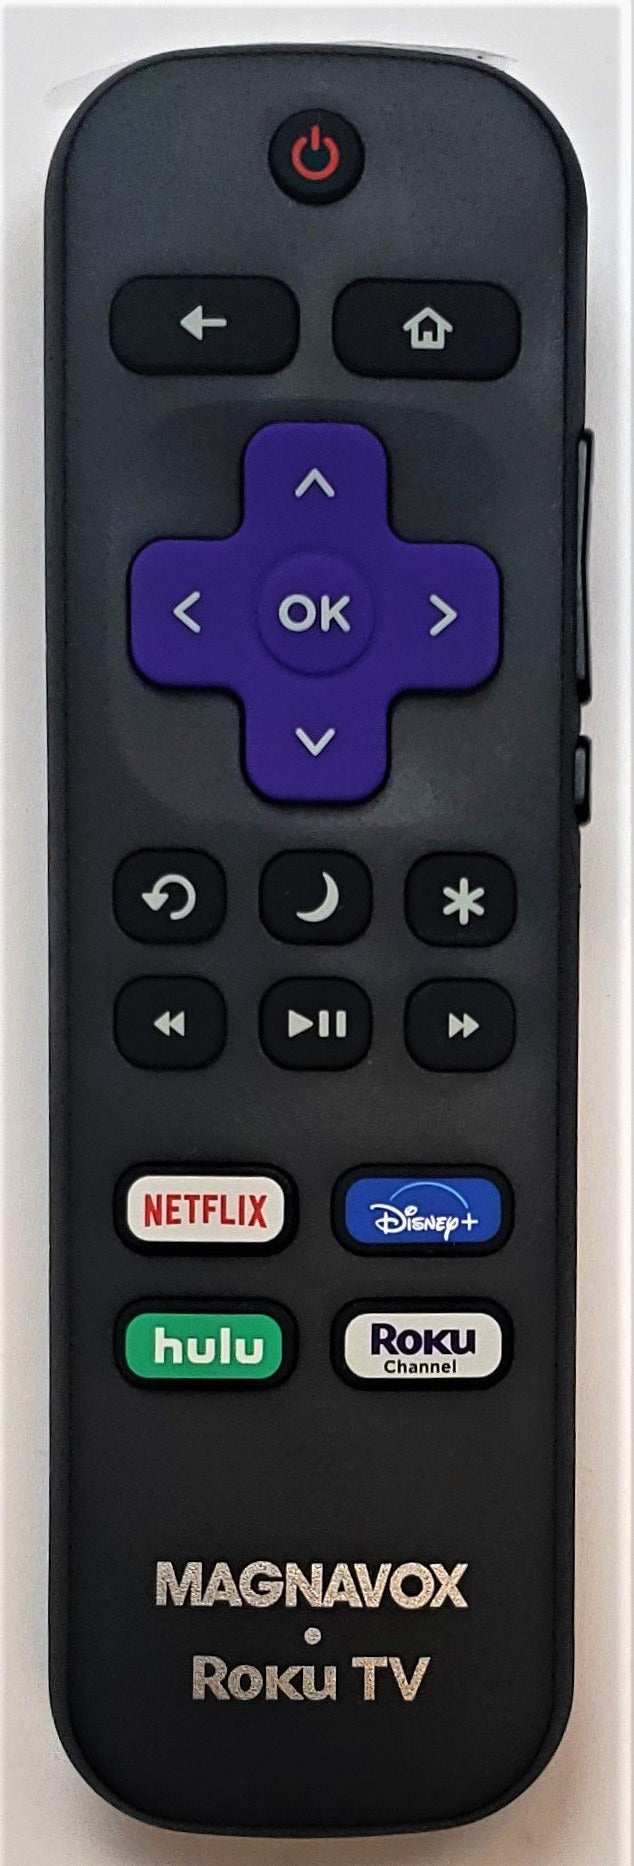 OEM replacement remote control for Magnavox Roku TV URMT21CND014